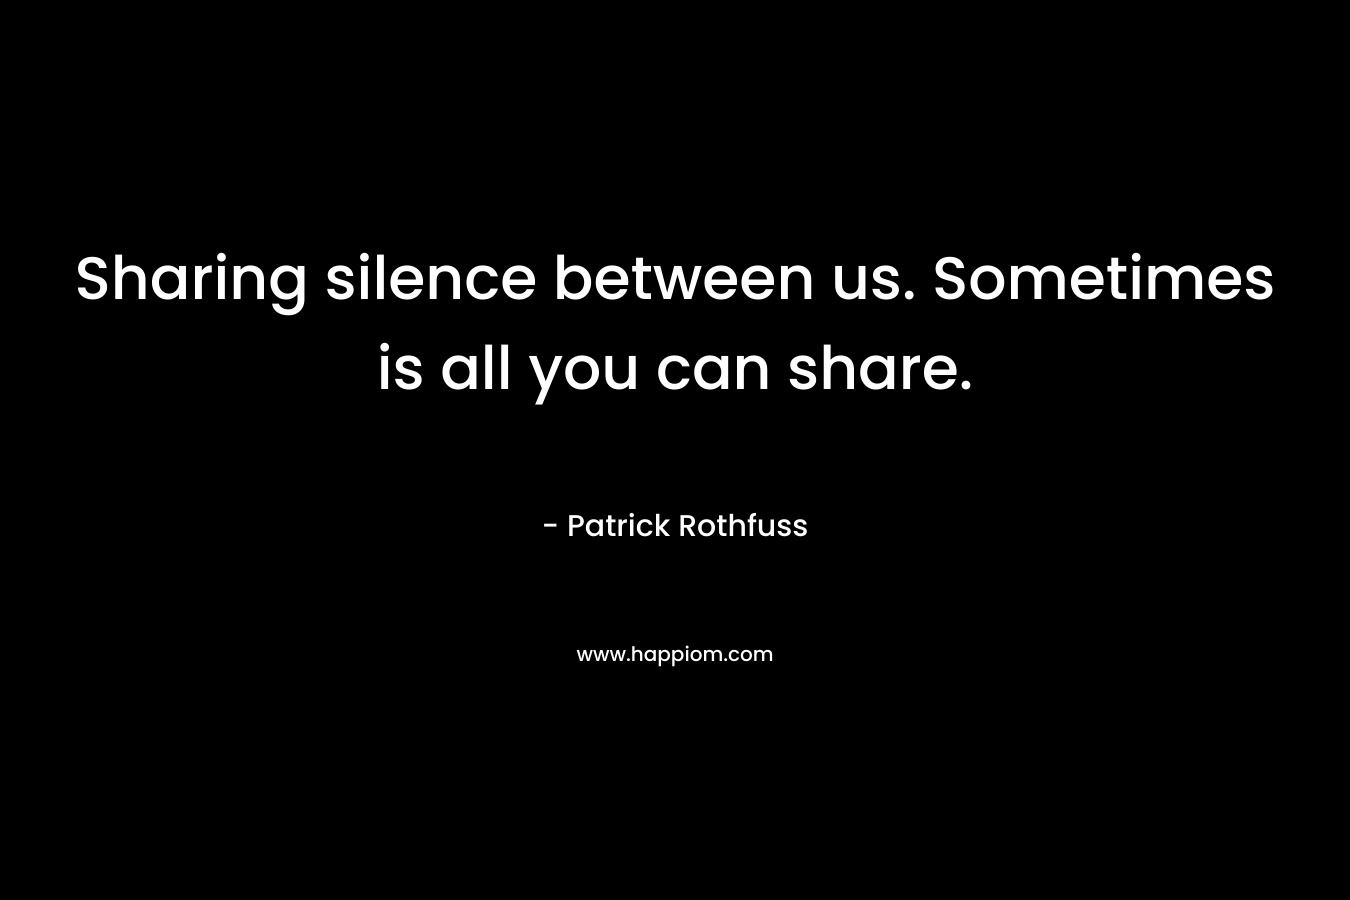 Sharing silence between us. Sometimes is all you can share.